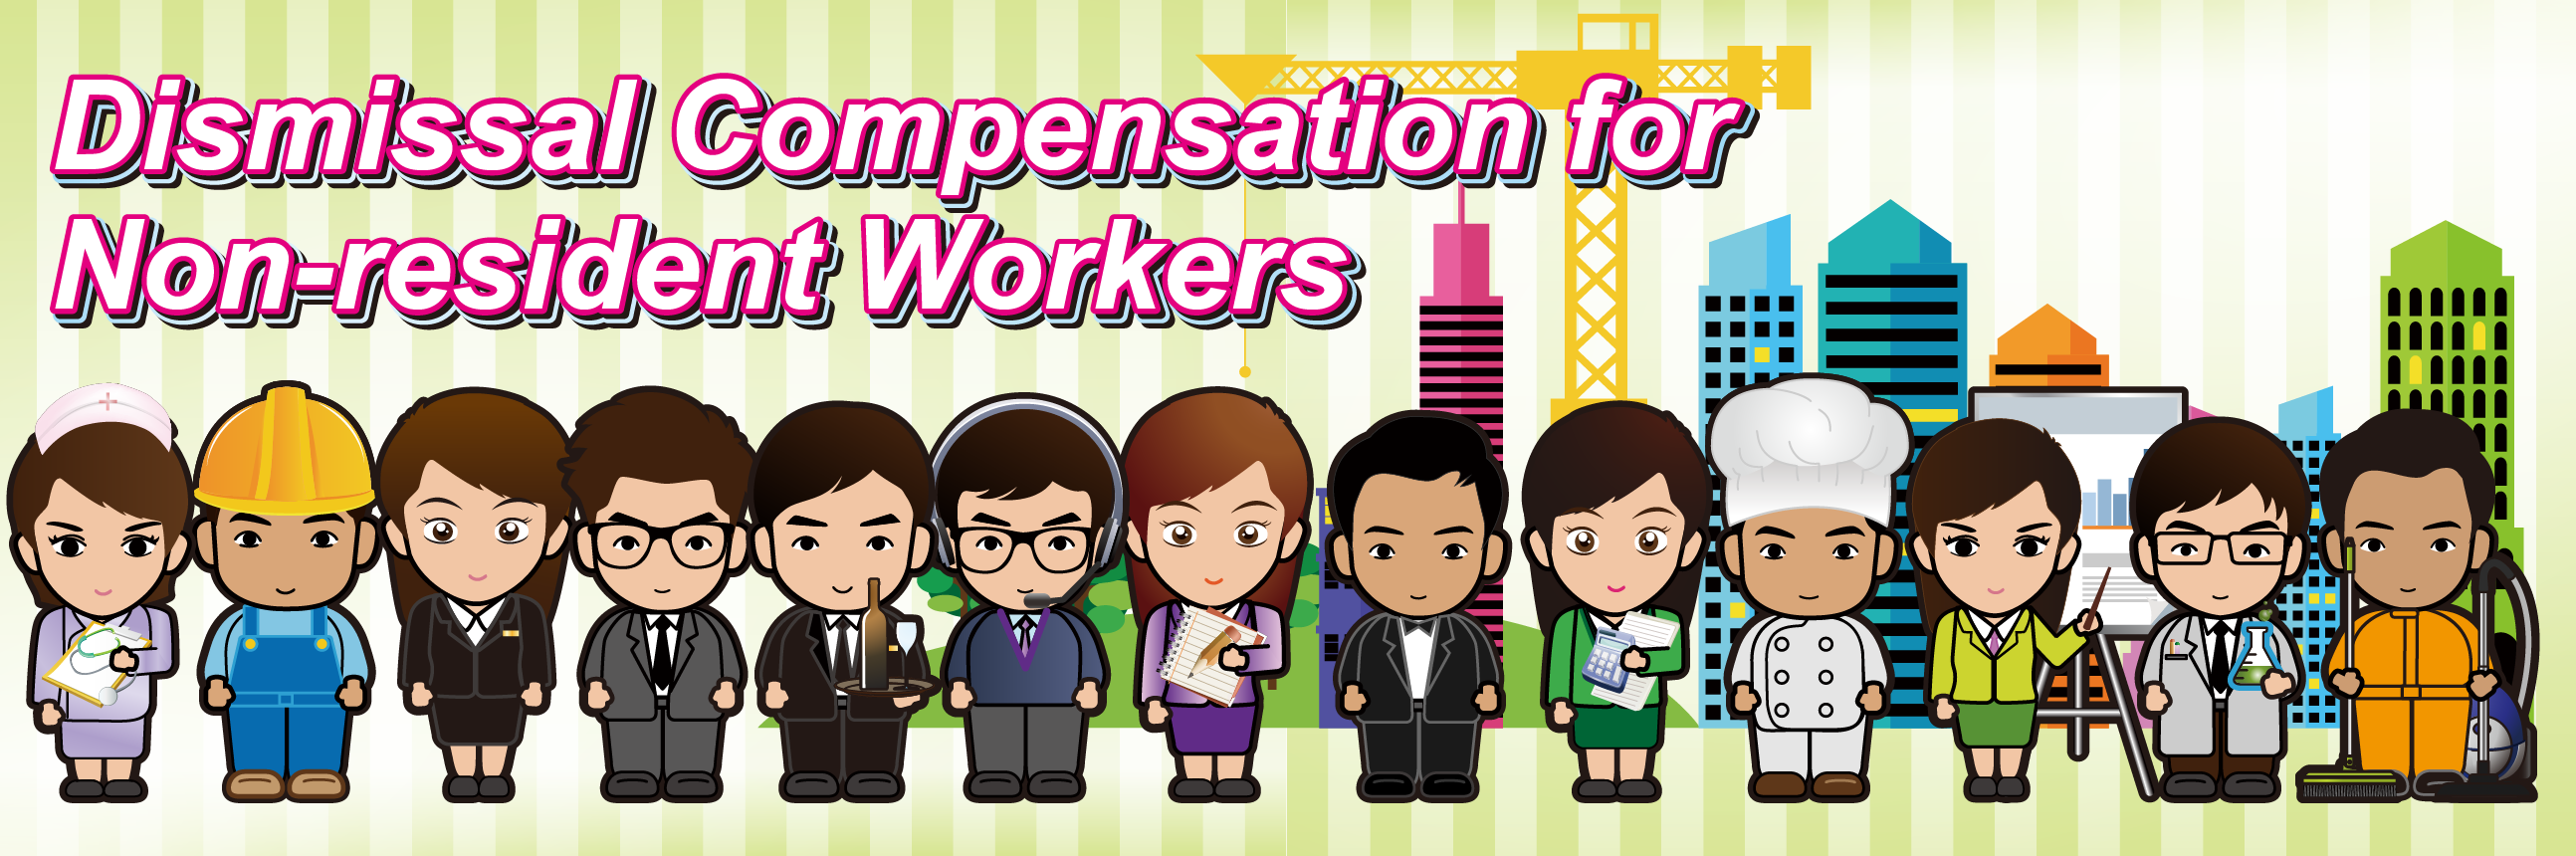 Dismissal Compensation for Non-resident Workers